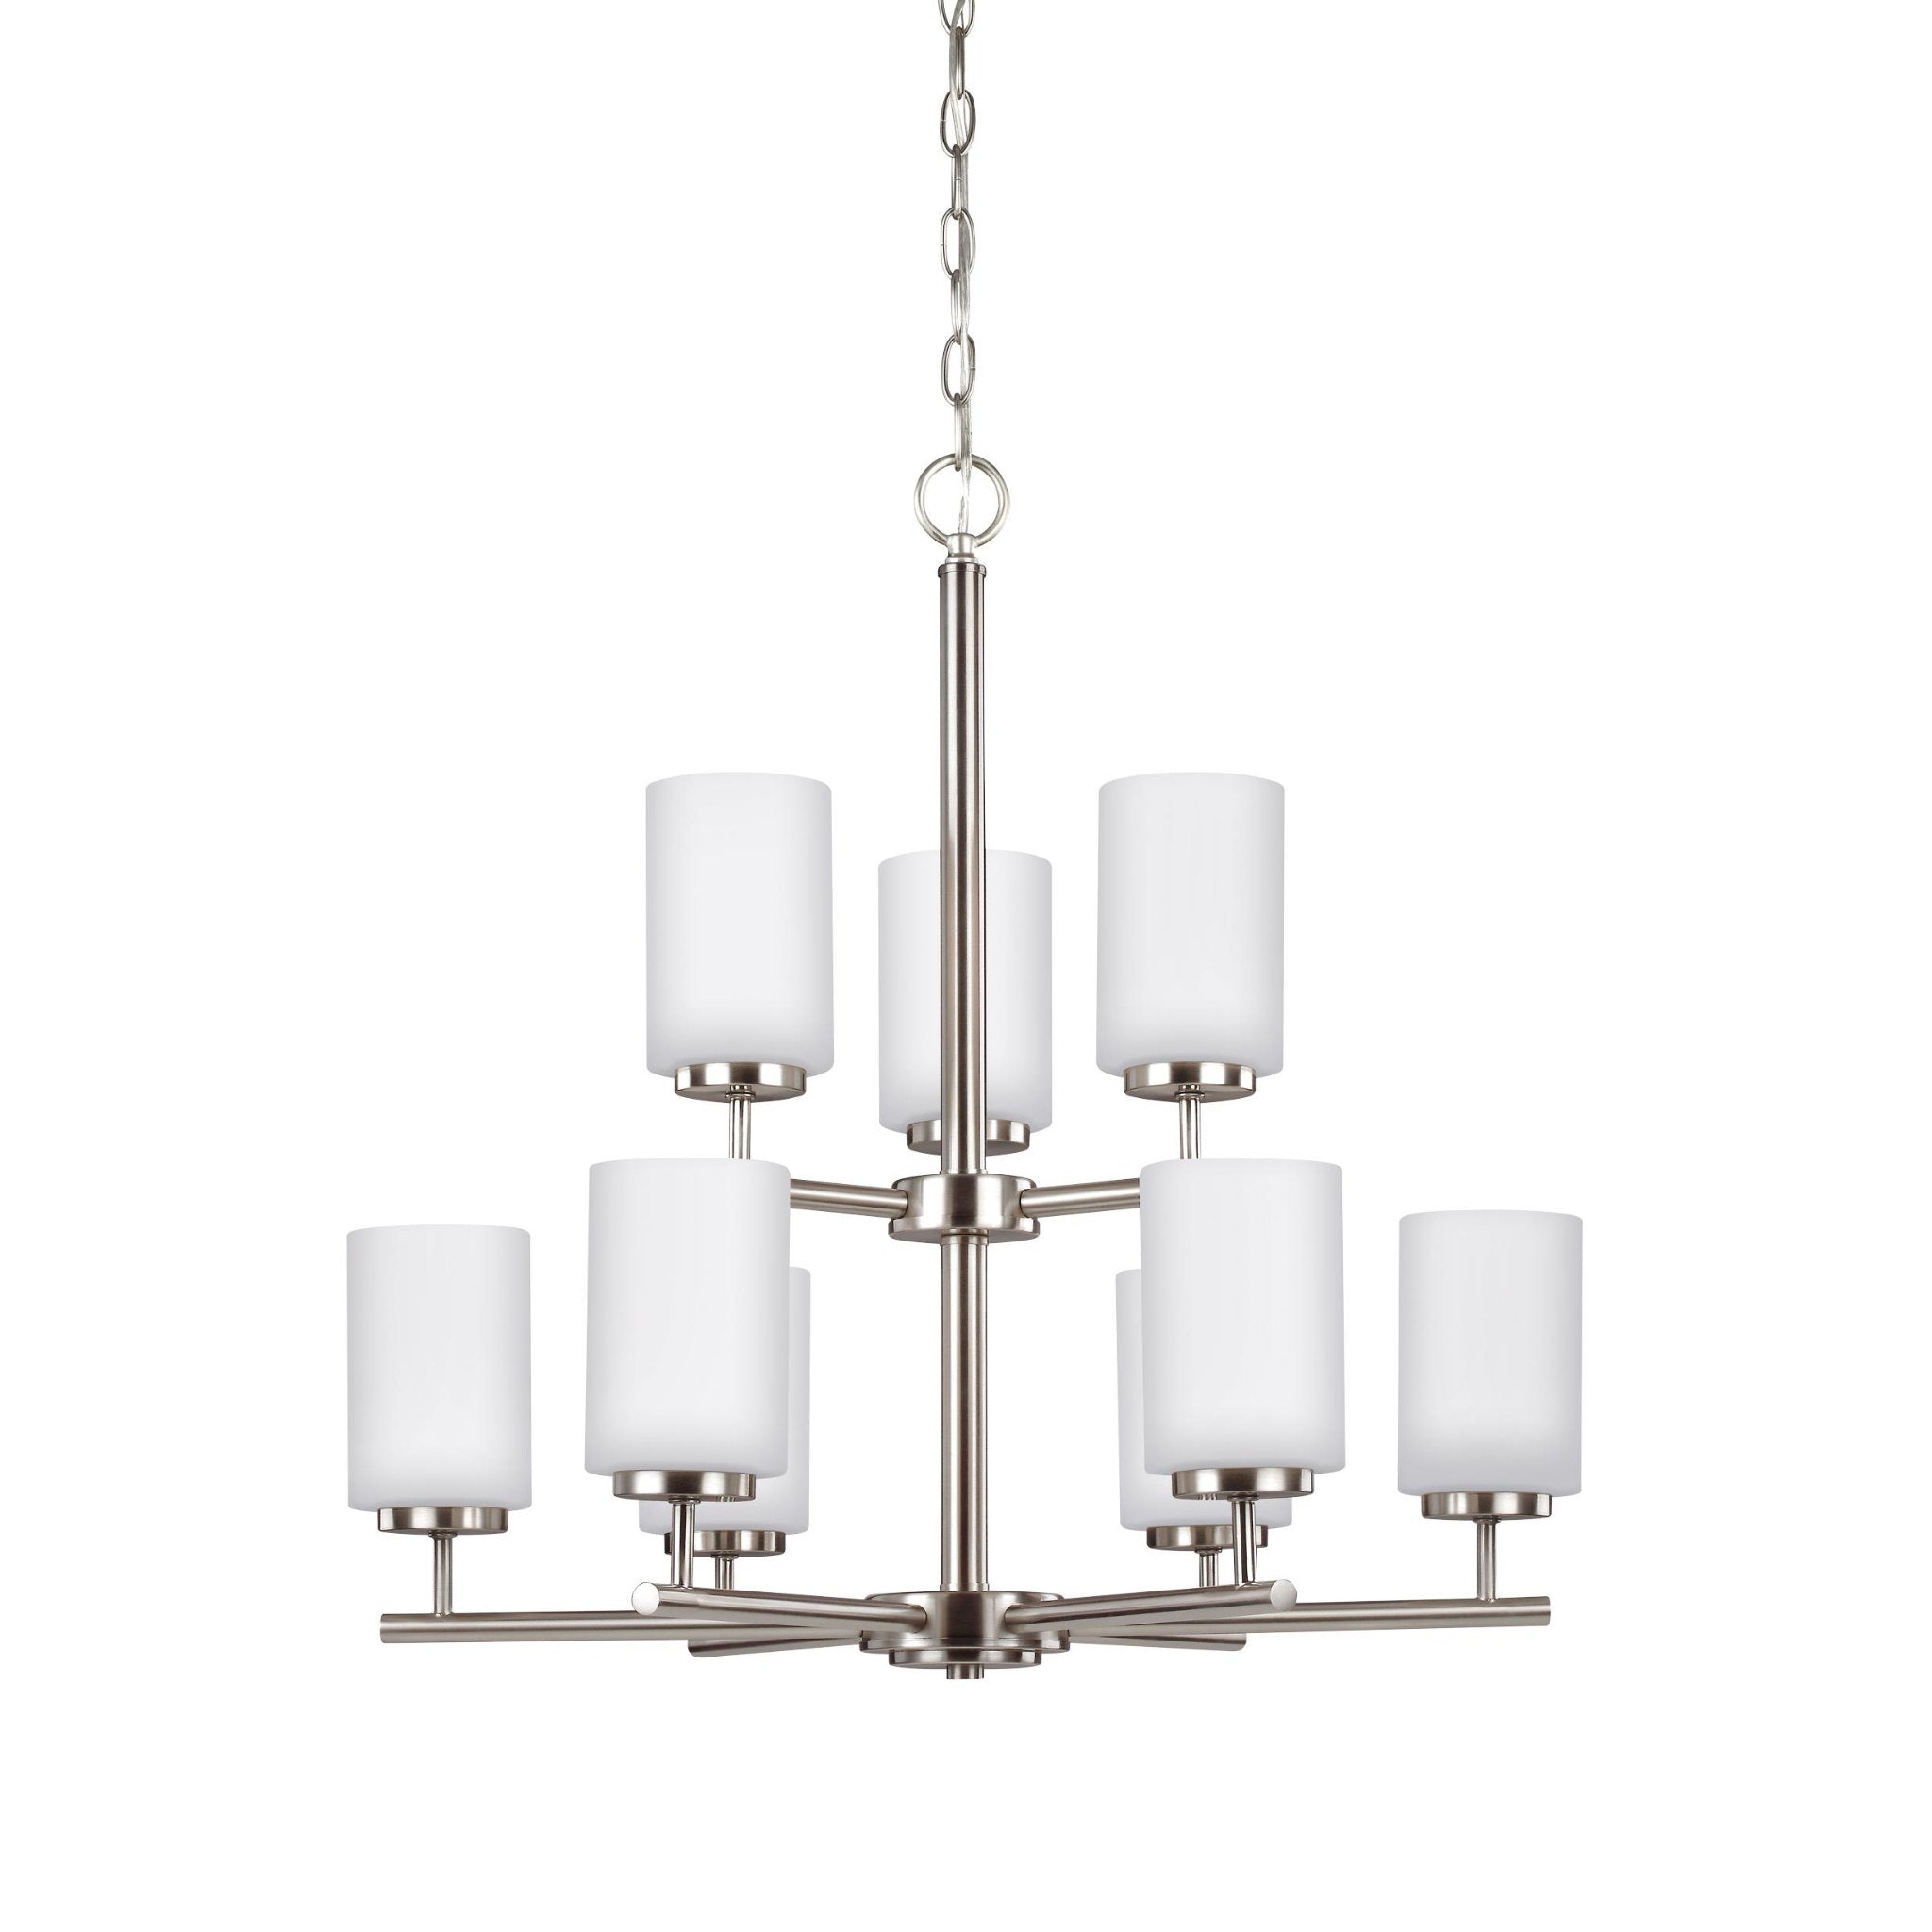 Oslo Nine Light Chandelier Contemporary 26.75" Height Steel Round Cased Opal Etched Shade in Brushed Nickel